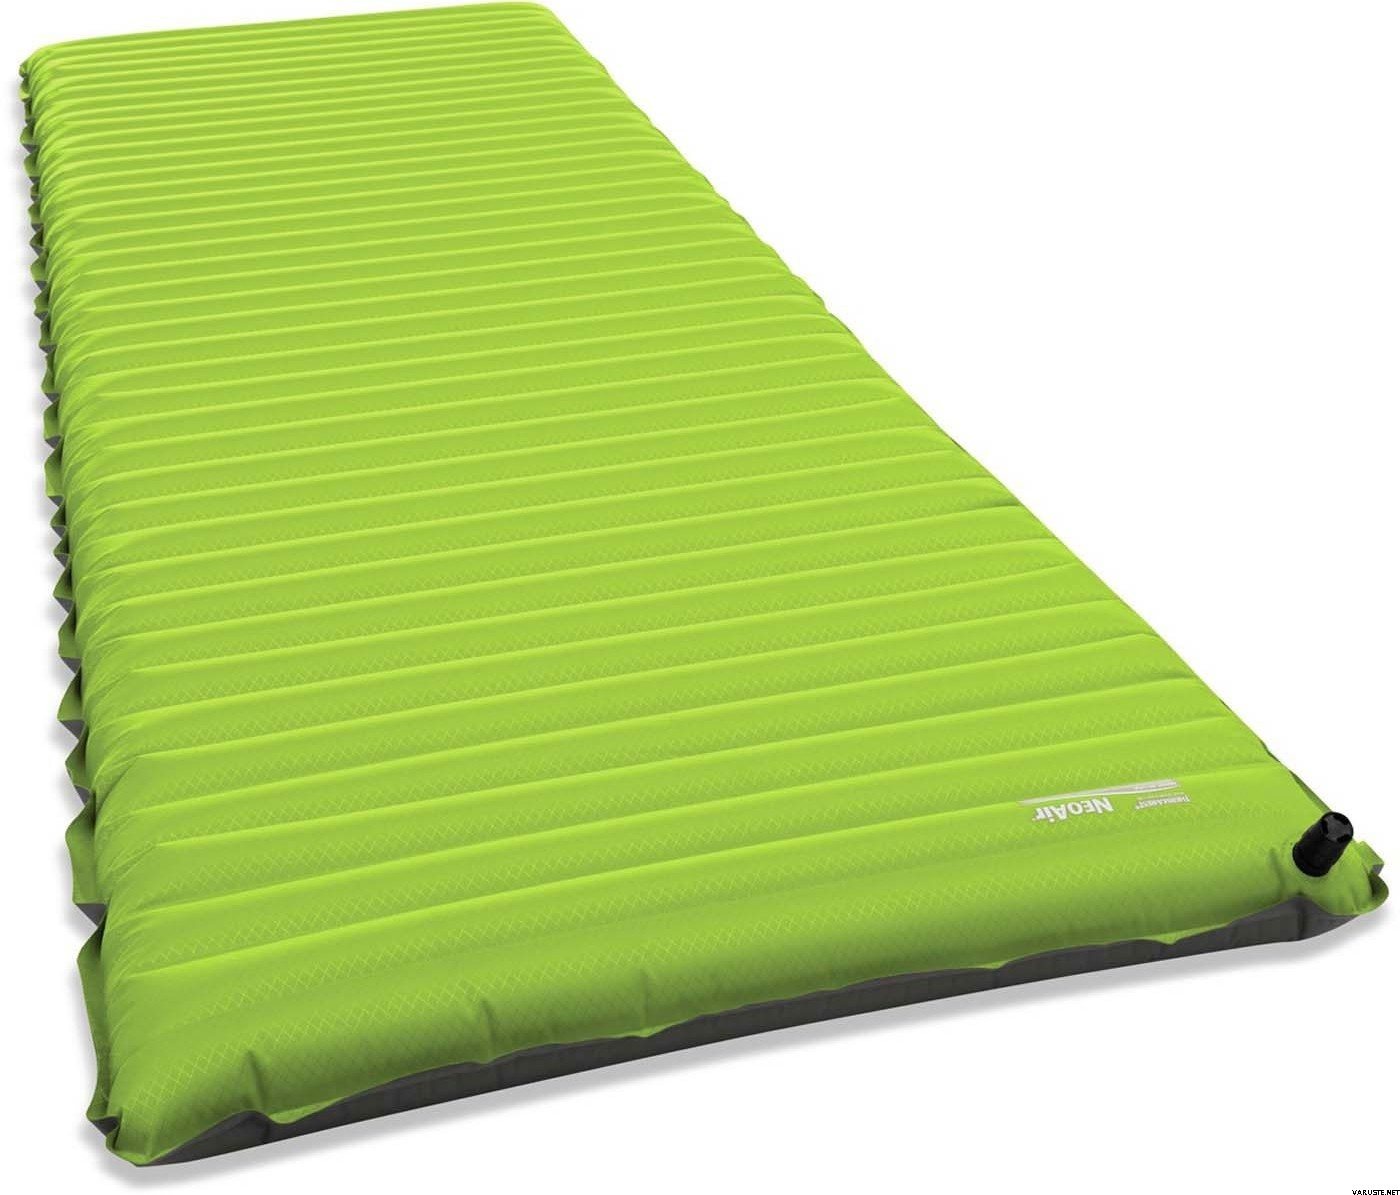 Therm-a-rest NEOAIR XLITE Max SV